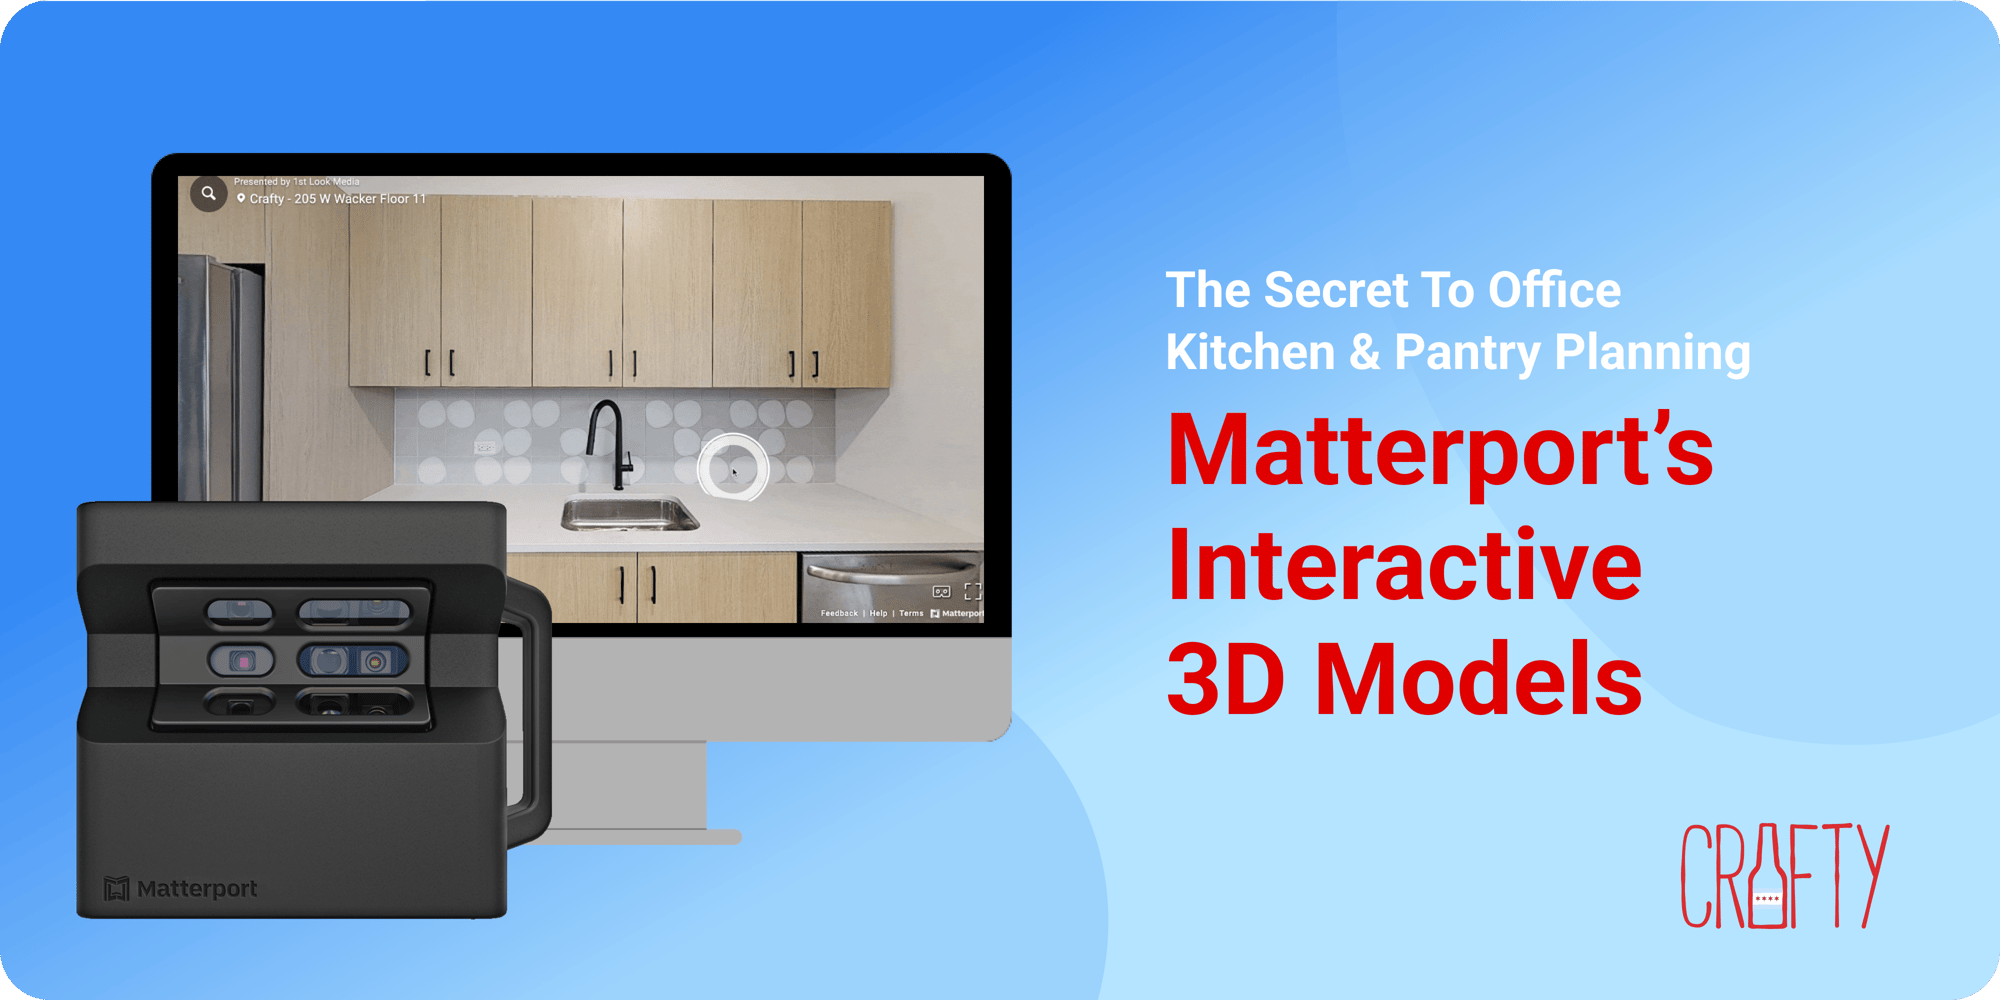 How Crafty uses Matterport Technology